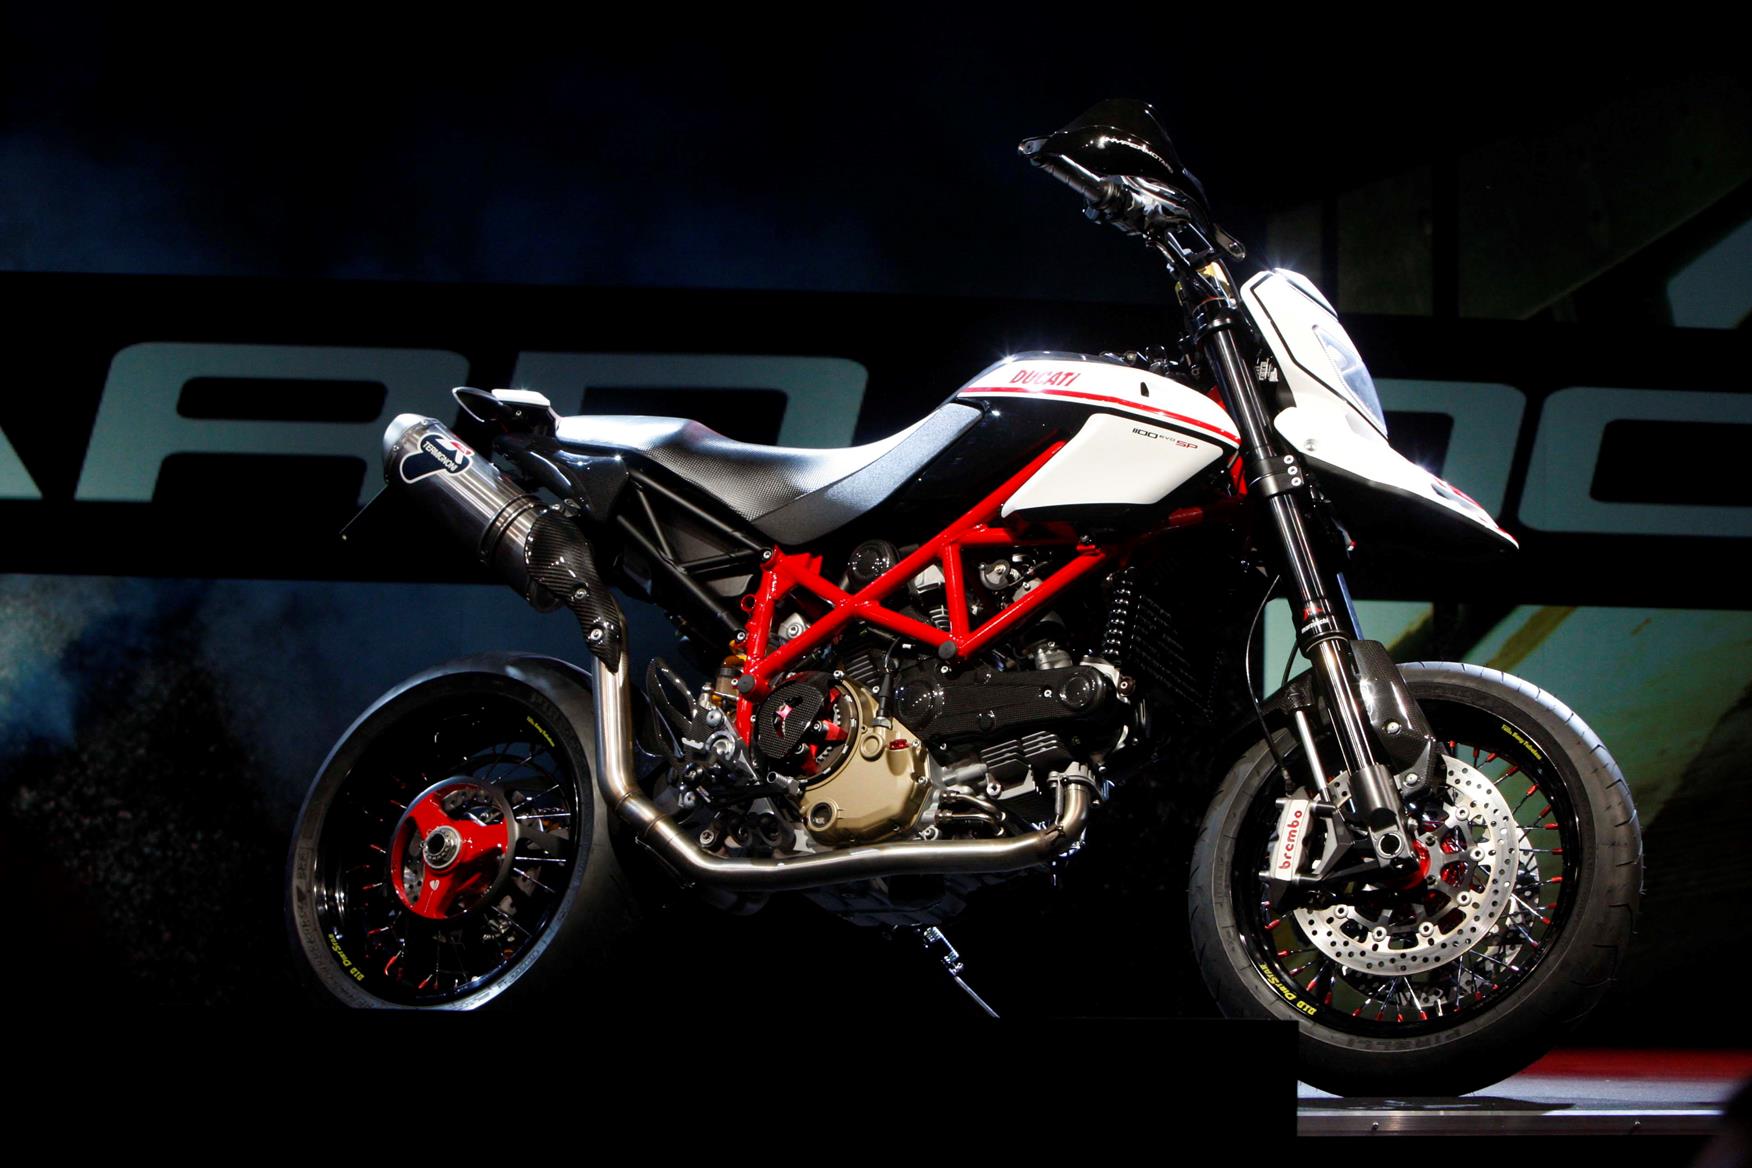 Milan Show: 2010 Ducati Hypermotard Evo SP first pics and video | MCN